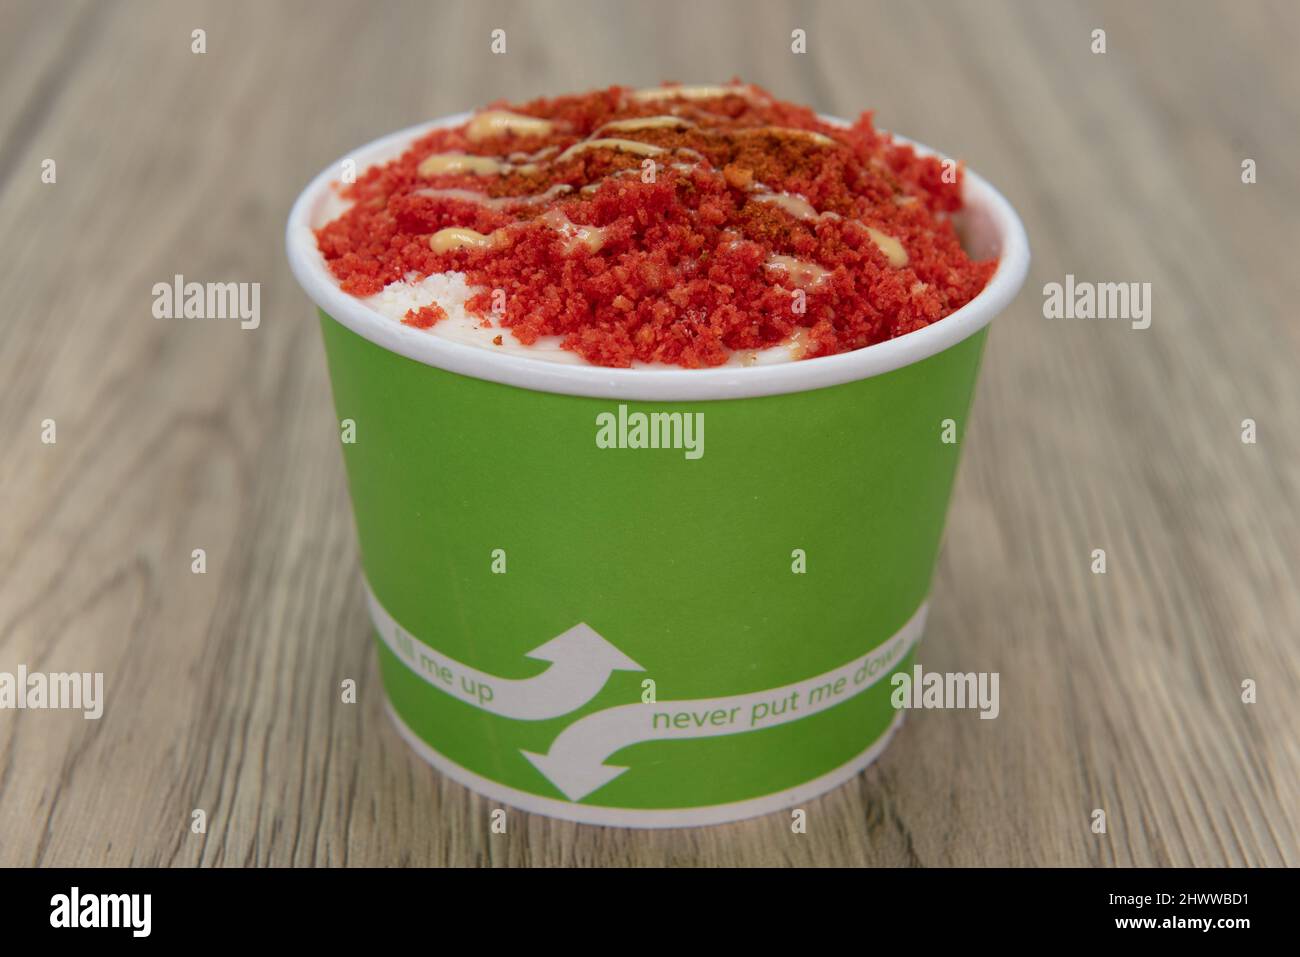 Delicious ice cream esquite topped with spicy crumbs and served in a take out order cup. Stock Photo